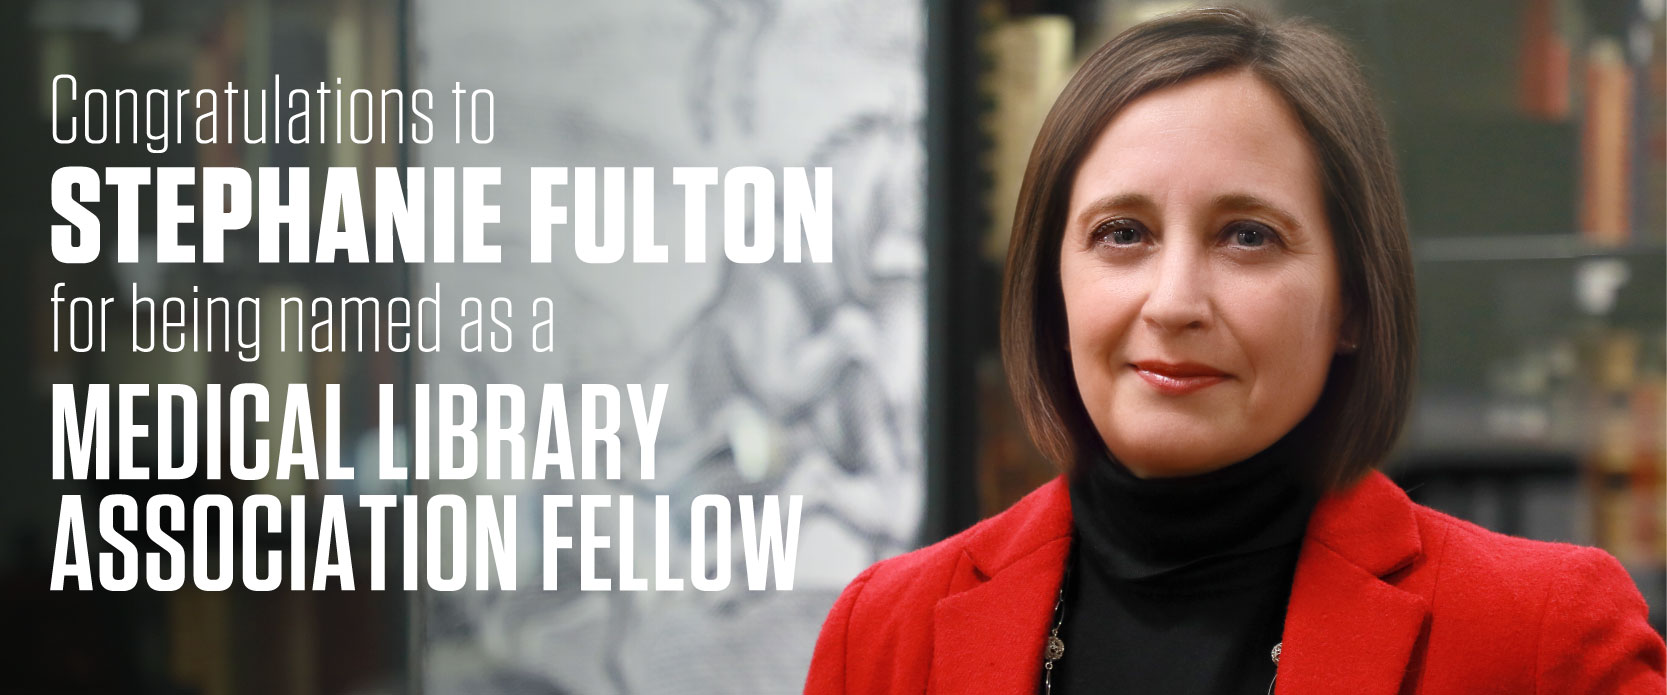 Congratulations to Stephanie Fulton for being named as a Medical Library Association Fellow